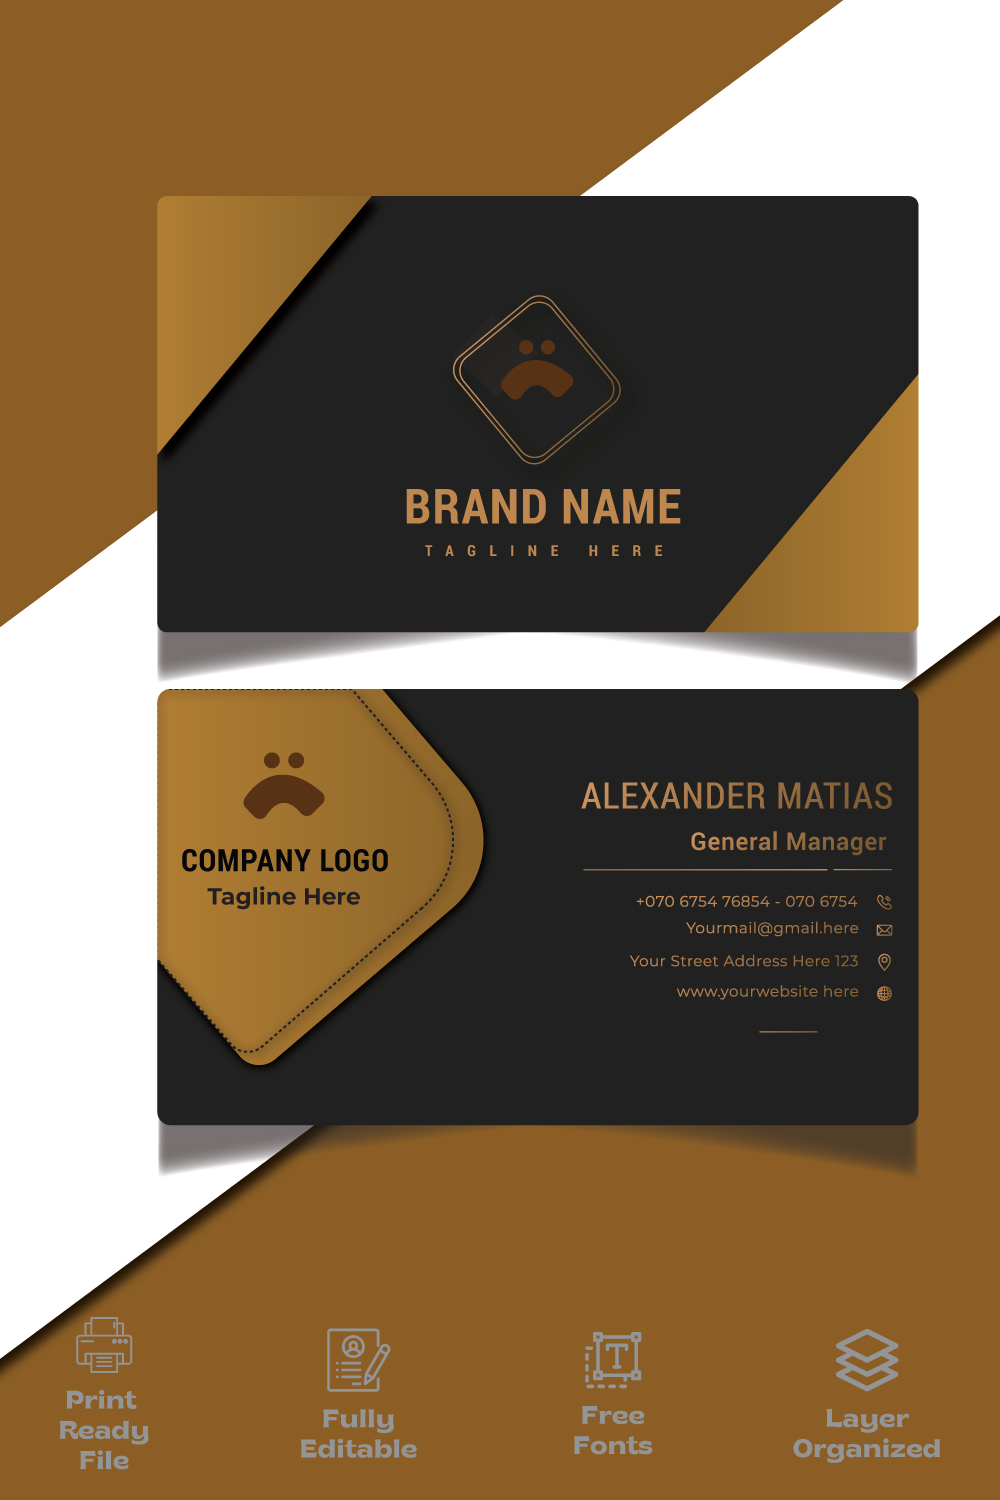 Creative and clean corporate business card template layout Vector illustration Stationery design pinterest preview image.